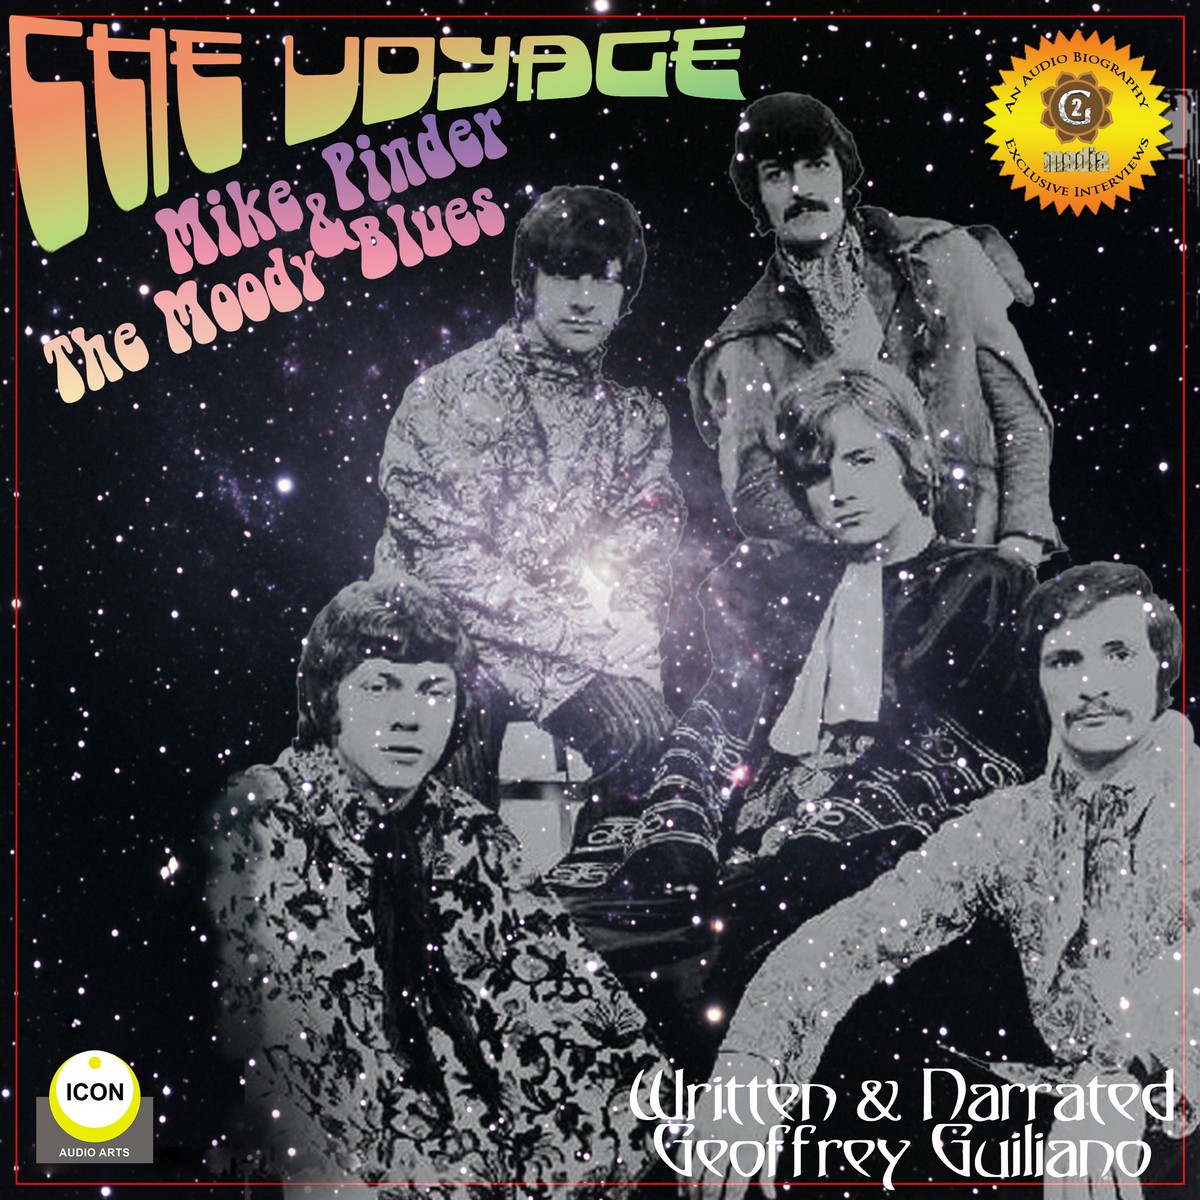 The Voyage – Mike Pinder & The Moody Blues